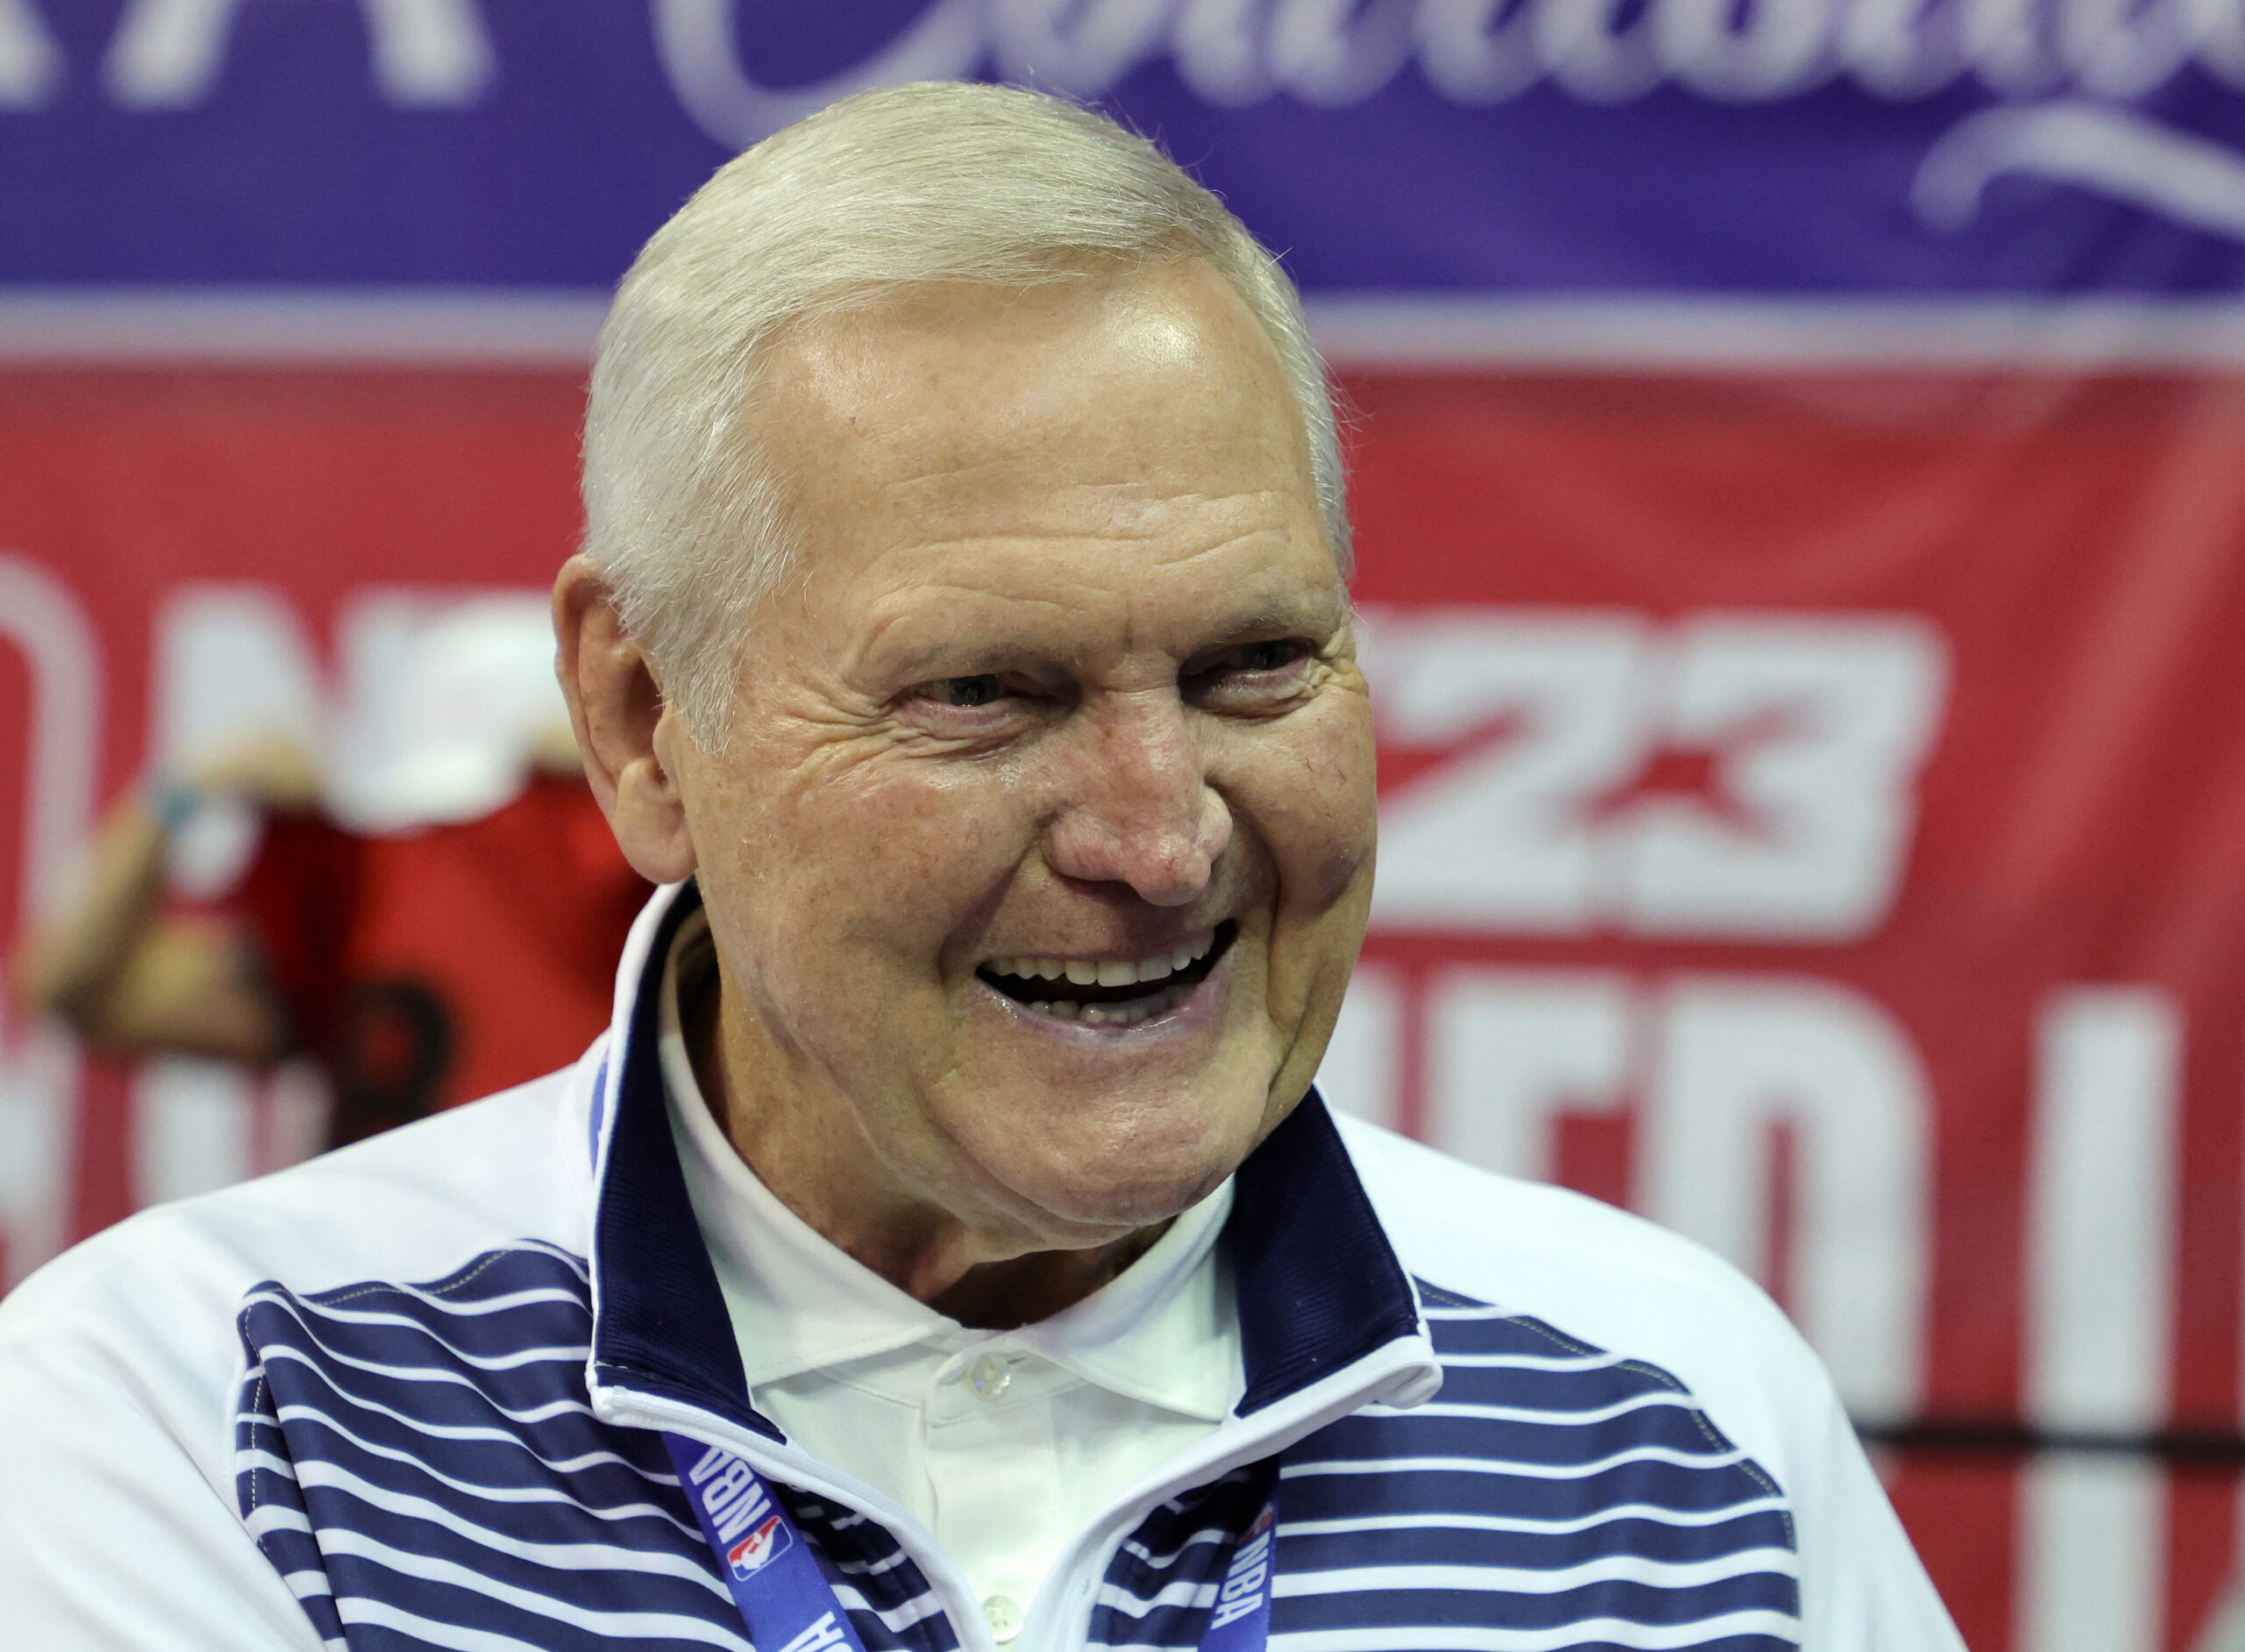 LA Clippers executive board member Jerry West attends a game between the Orlando Magic and the Houston Rockets during the 2022 NBA Summer League at the Thomas & Mack Center in Las Vegas, Nevada, on July 7, 2022. Obsessive perfectionism and a deadly jump shot made Jerry West, who died on June 12, 2024 at the age 86, one of the greatest guards in NBA history. His uncompromising will to win and encyclopedic knowledge of the game also made 